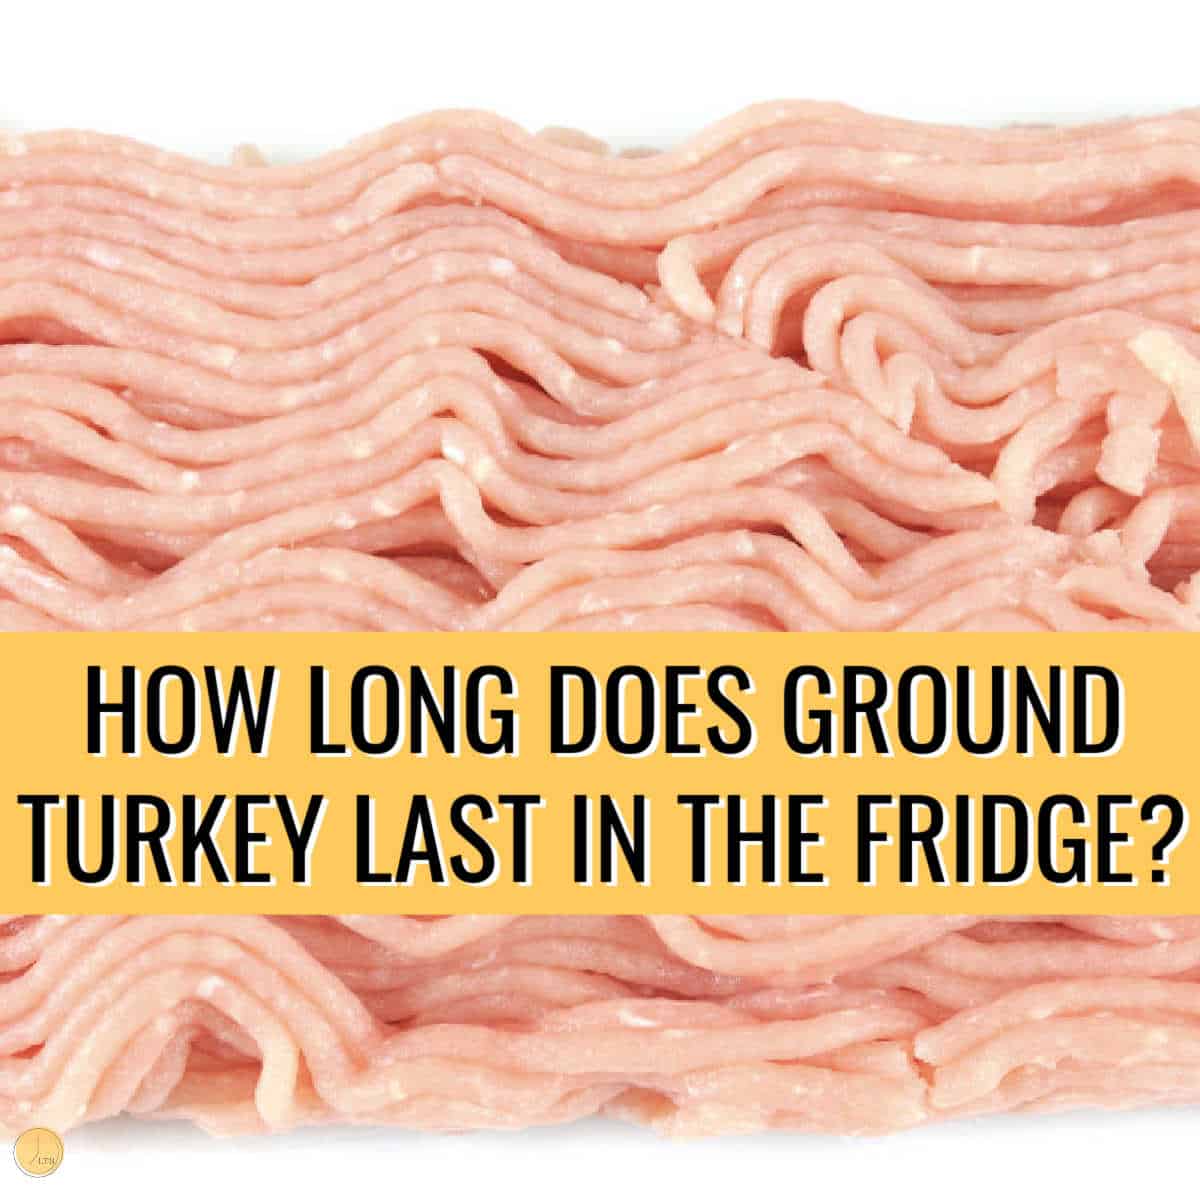 How Long does Ground Turkey last in the Fridge?